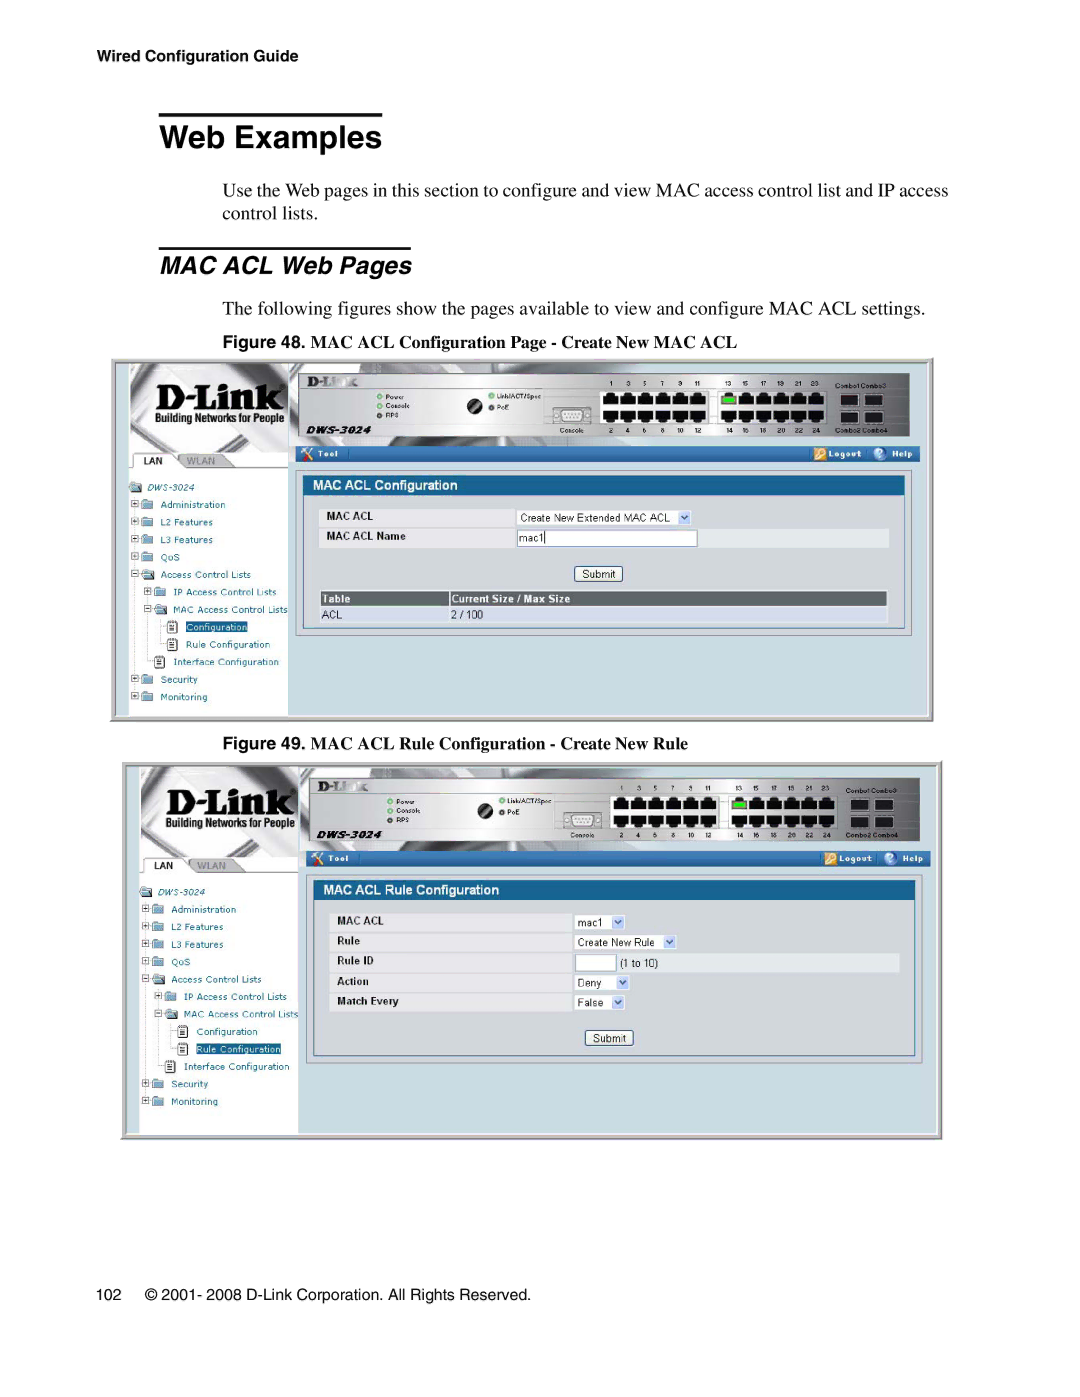 D-Link DWS-3000 manual MAC ACL Web Pages, MAC ACL Configuration Page Create New MAC ACL 